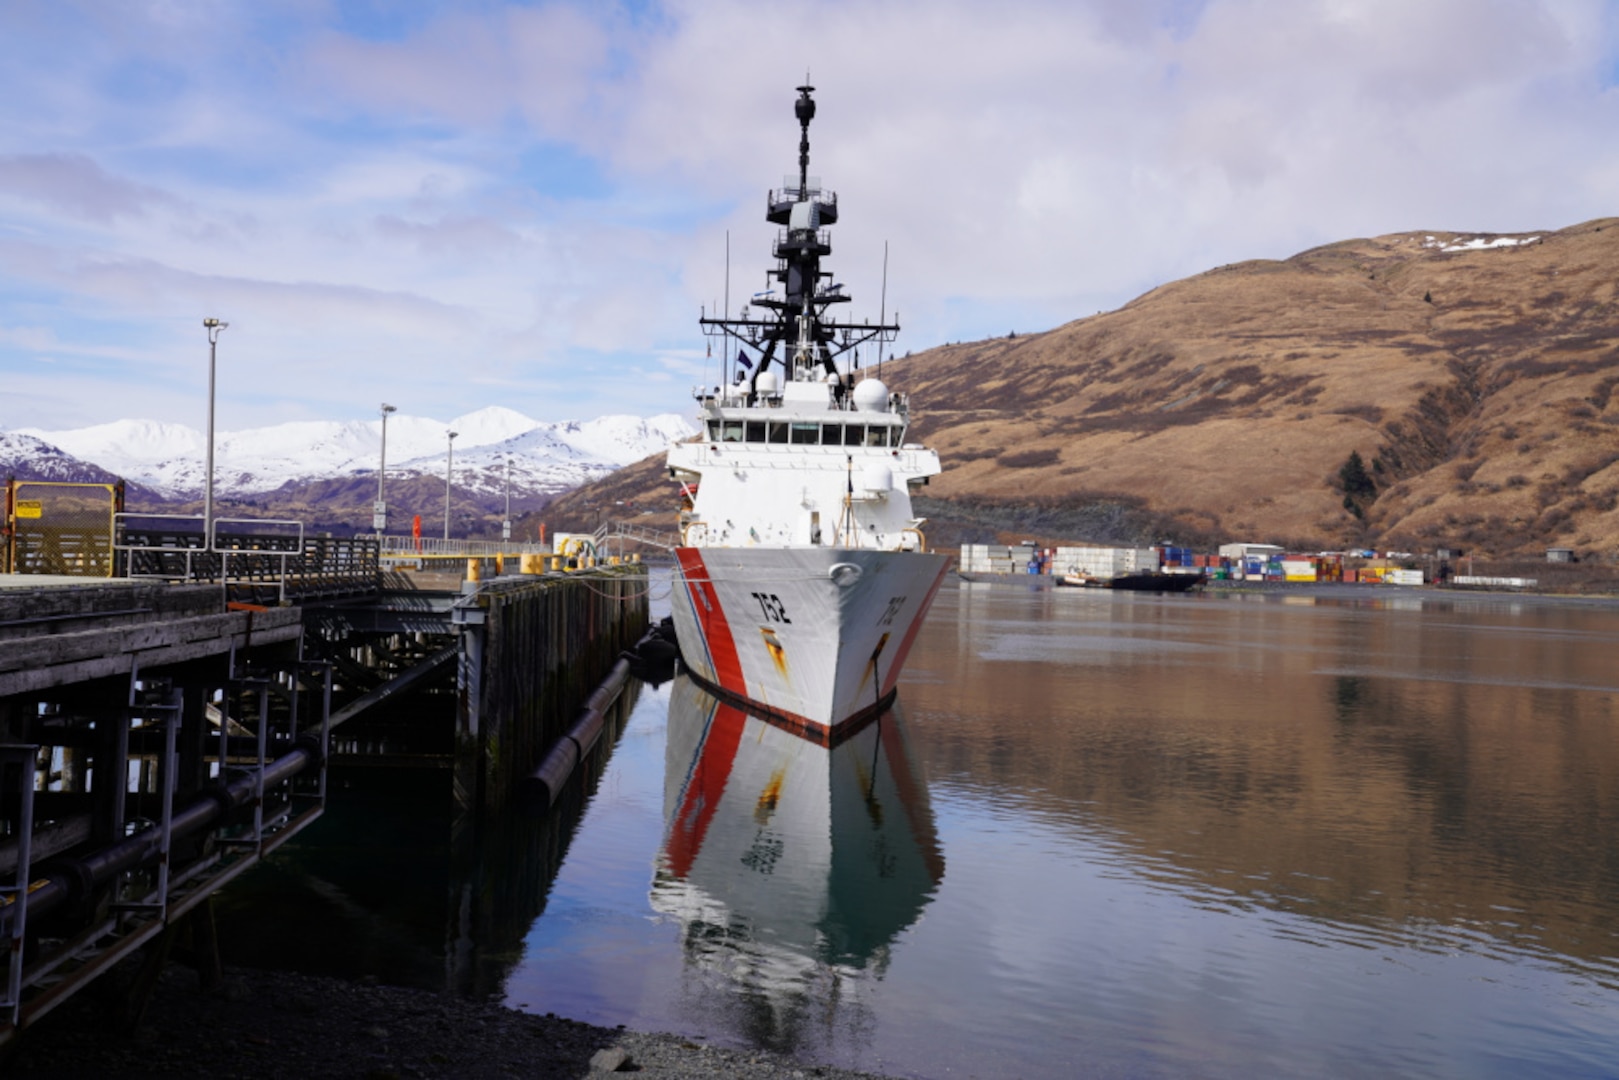 Coast Guard Cutter Stratton moored in Kodiak, Alaska, May 15, 2021. Stratton was commissioned in 2010 becoming the third of the Coast Guard’s legend class national security cutters. - U.S. Coast Guard photo courtesy Coast Guard Cutter Stratton personnel